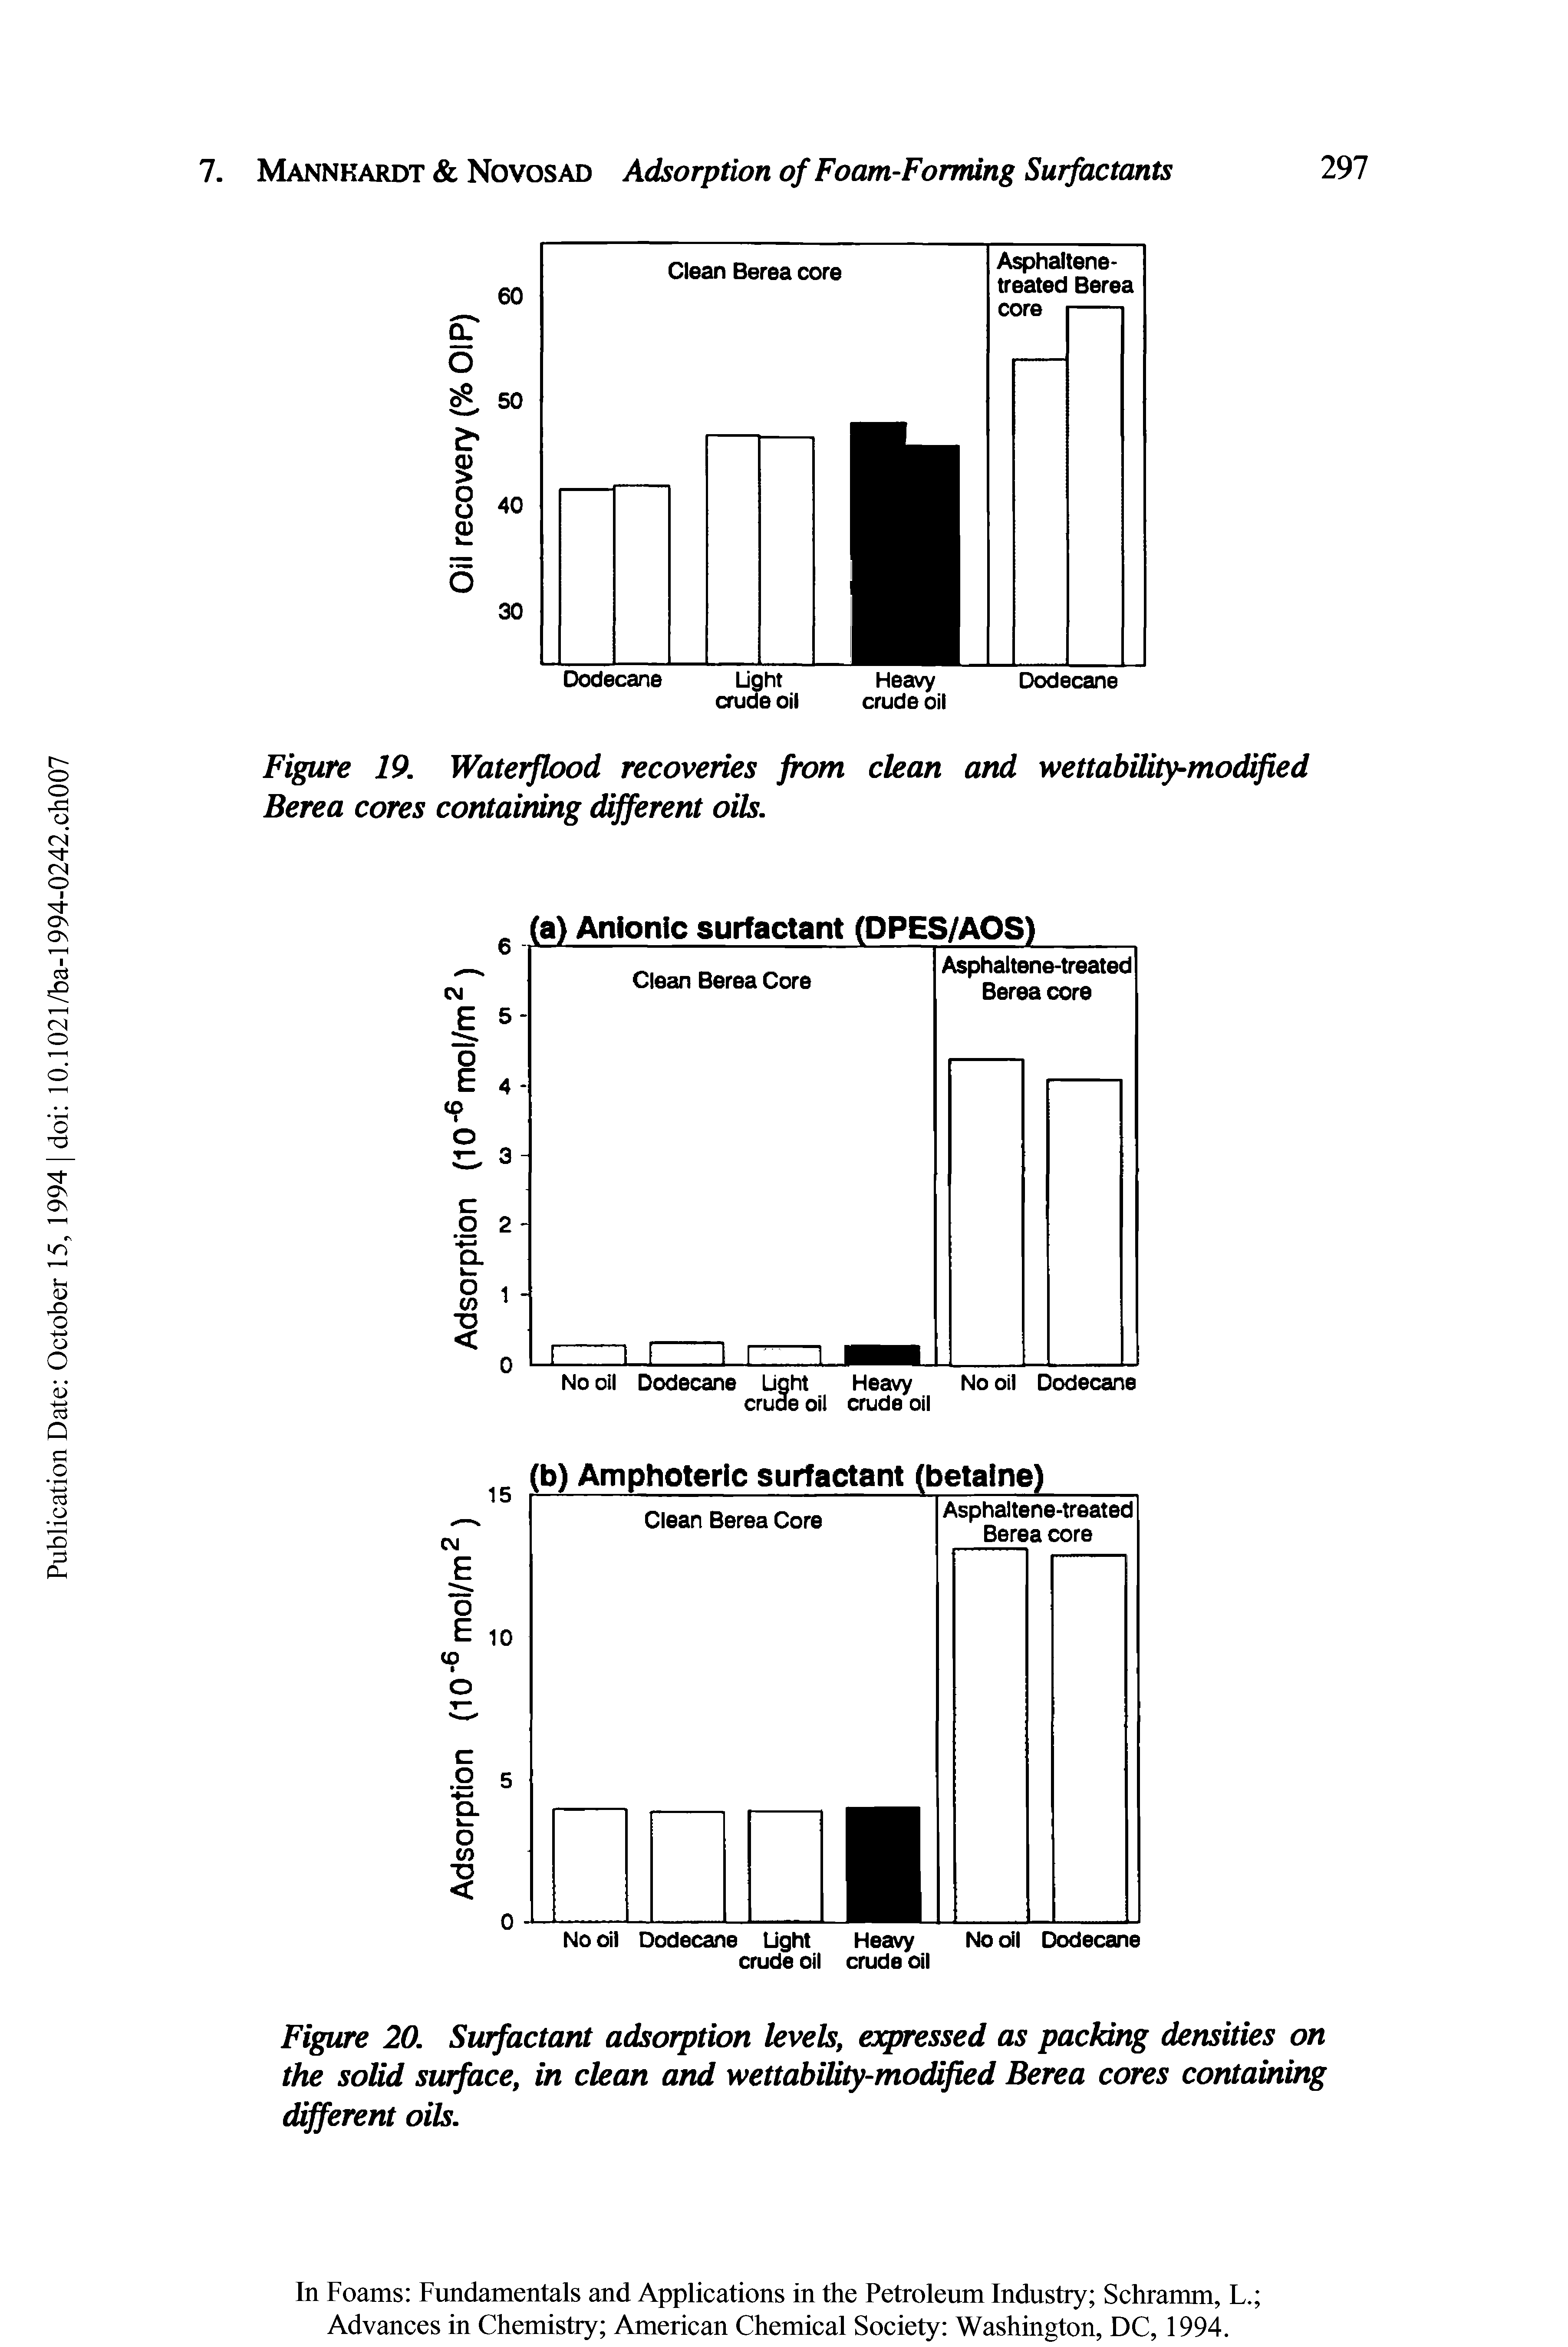 Figure 20. Surfactant adsorption levels, expressed as packing densities on the solid surface, in clean and wettability-modified Berea cores containing different oils.